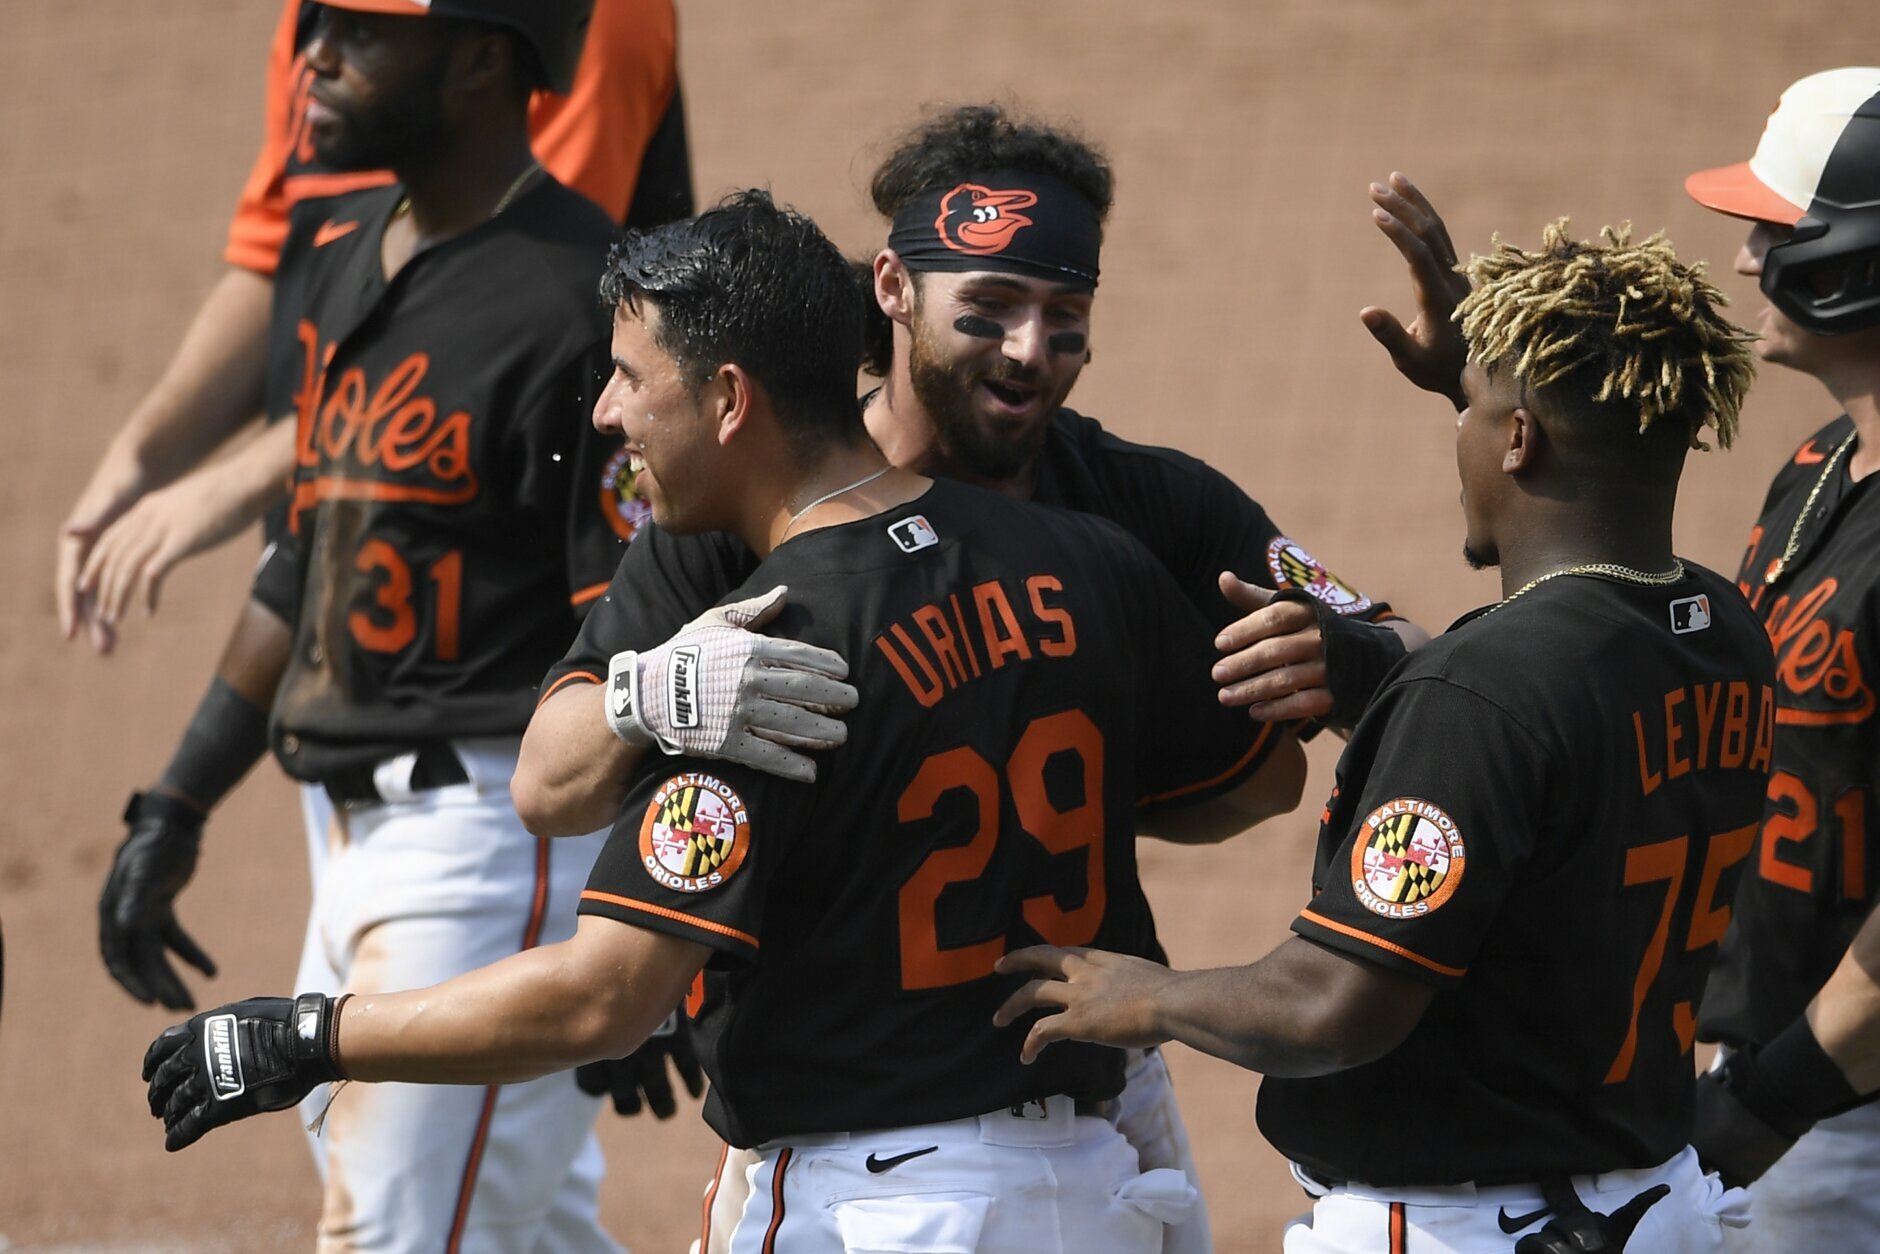 Orioles complete three-game sweep of Nationals with 5-4 win - WTOP